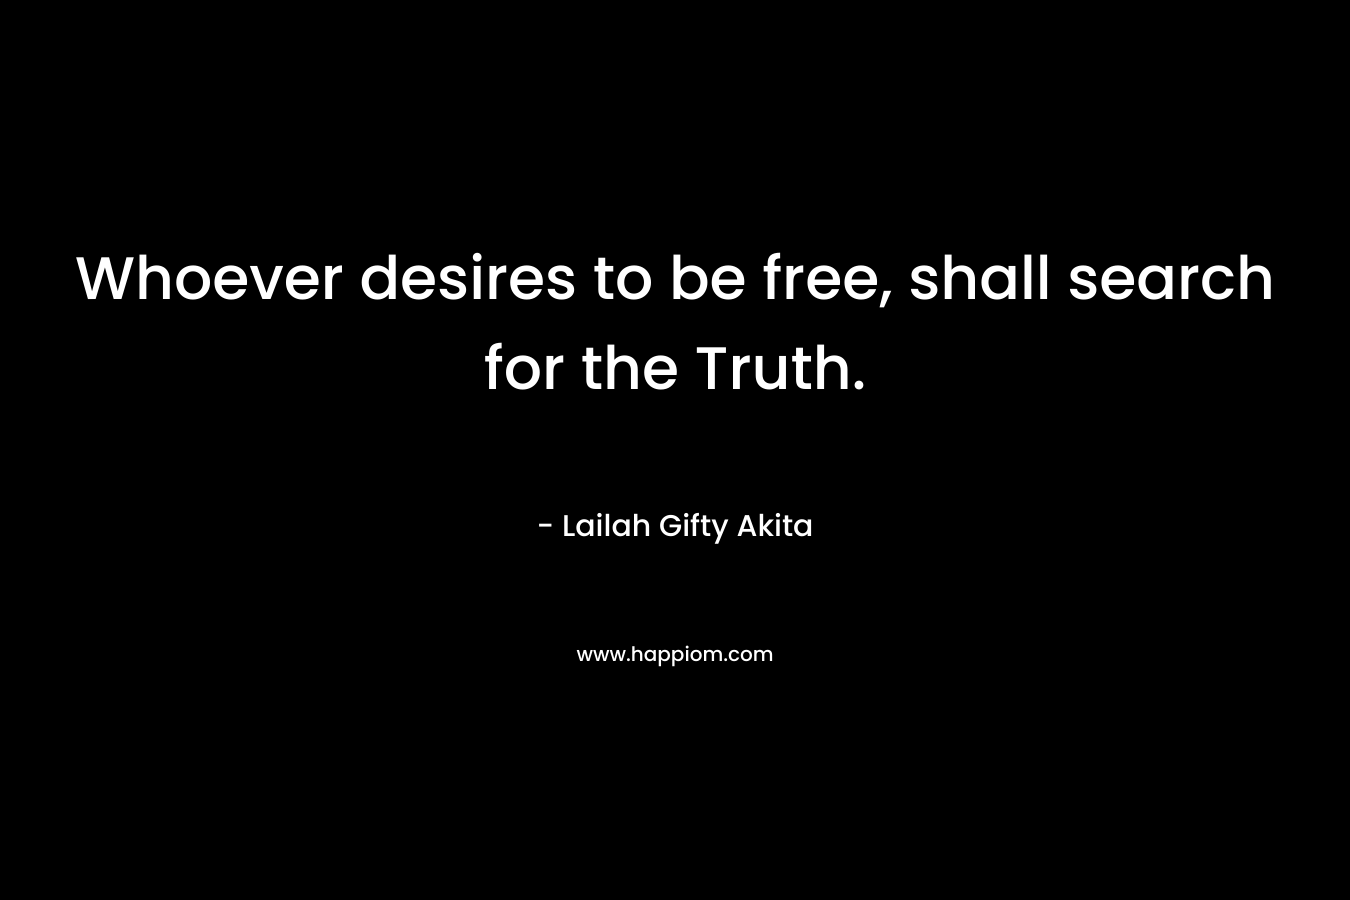 Whoever desires to be free, shall search for the Truth.